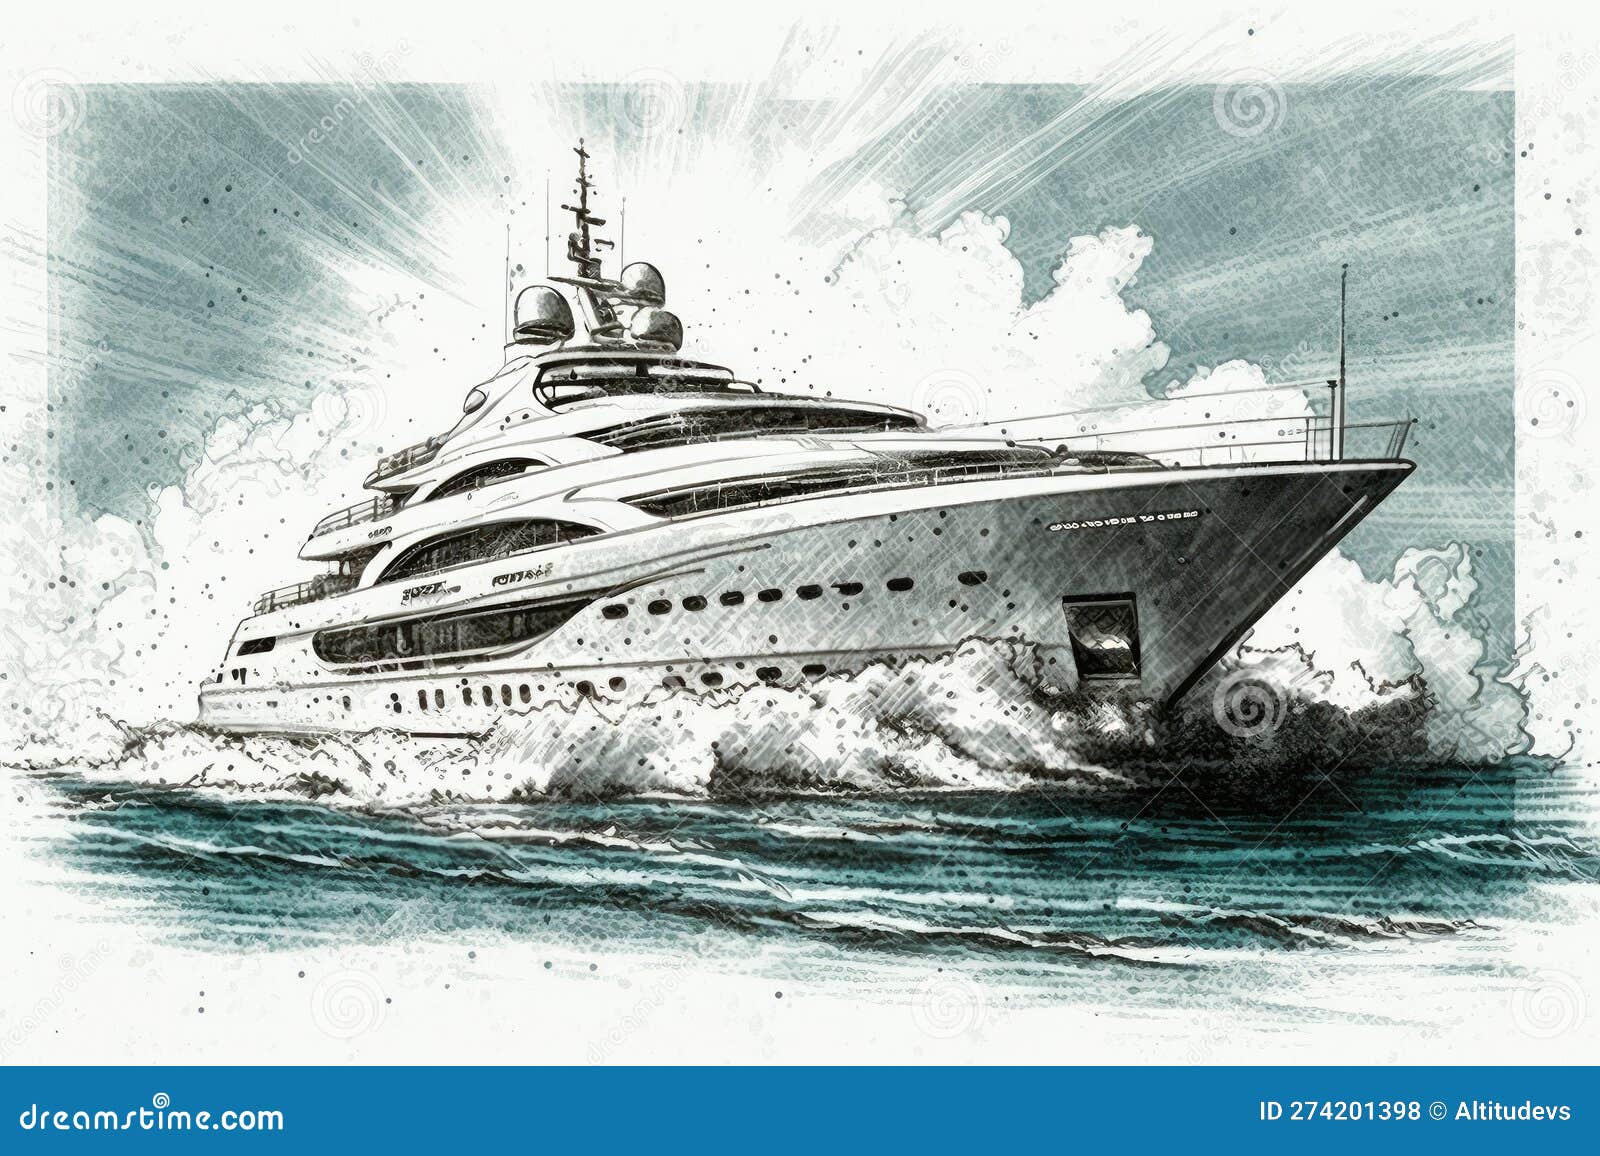 yacht pencil drawing